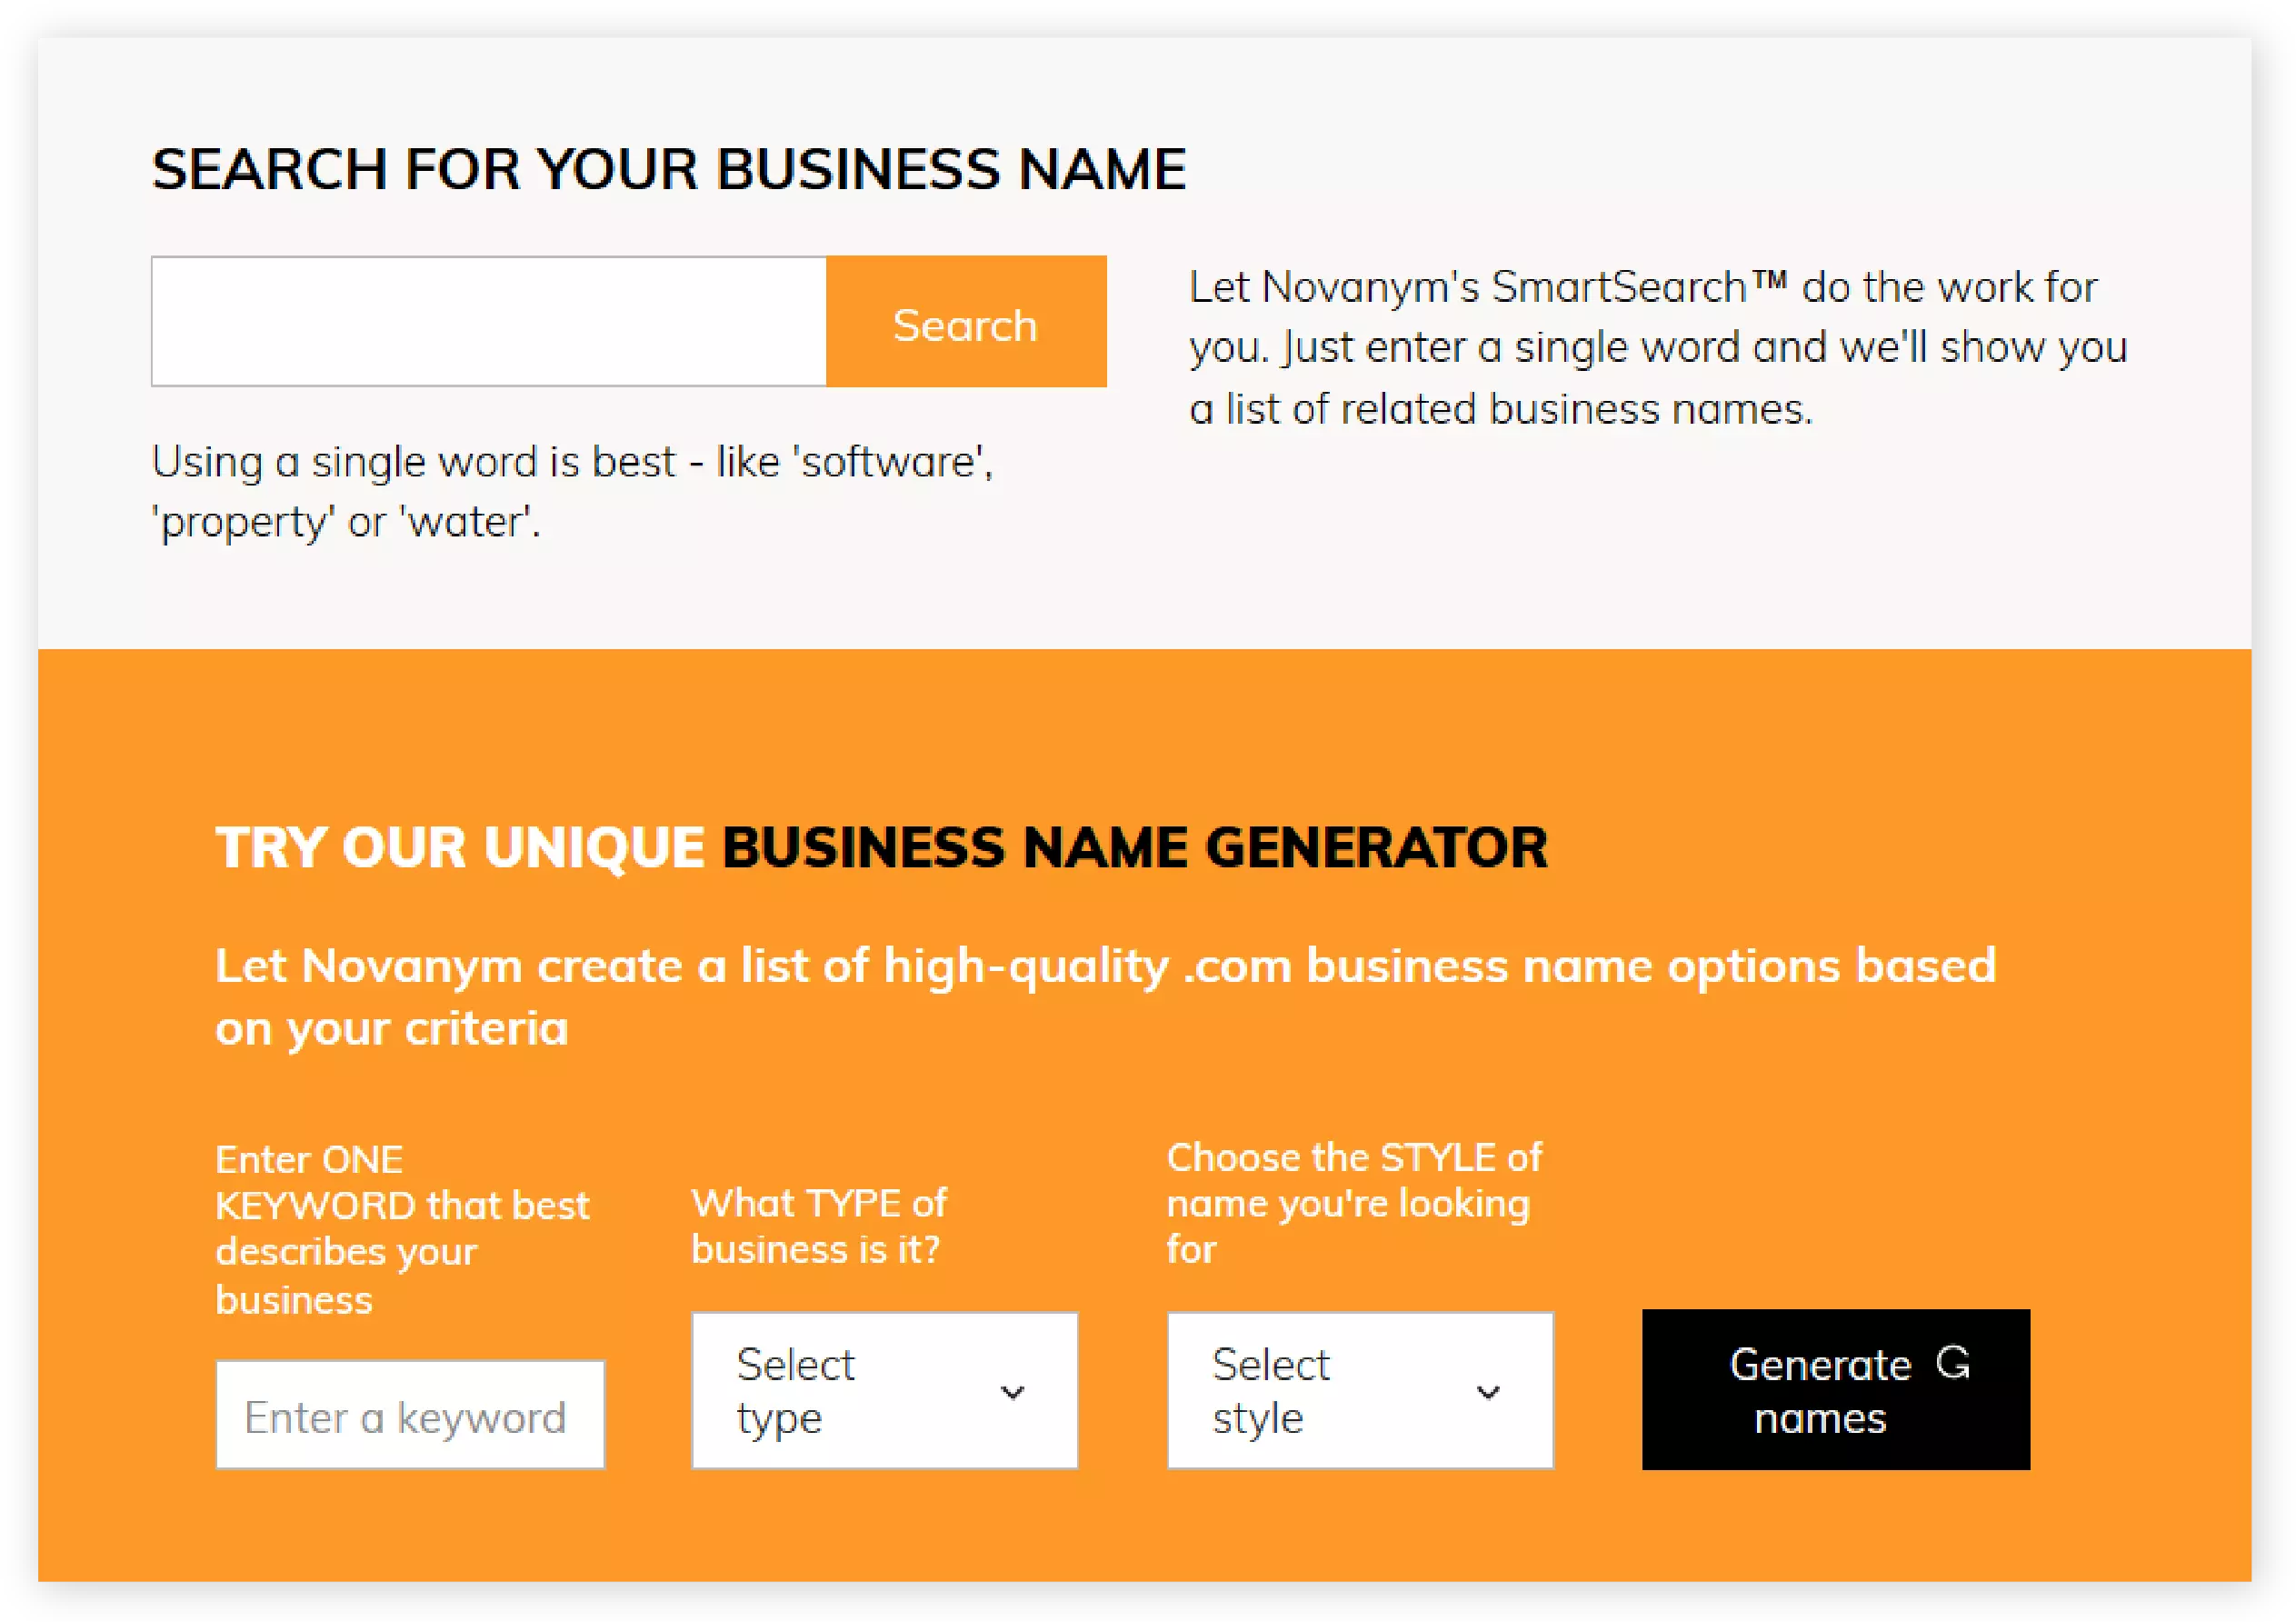 Search for your business name